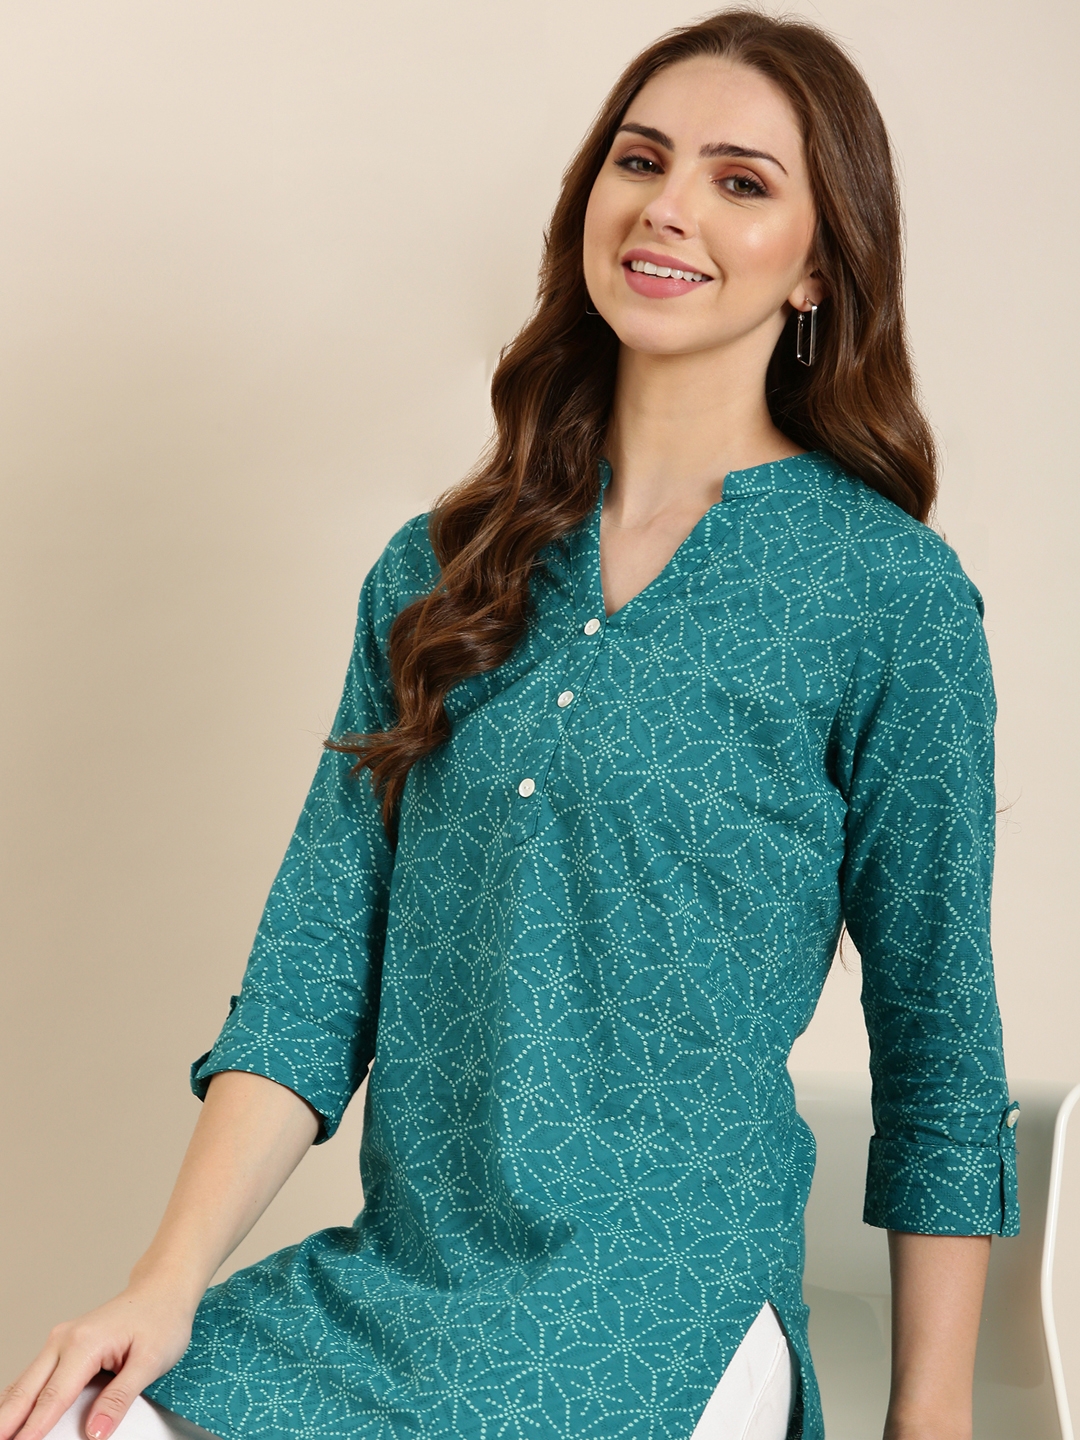 How to find and buy the best quality of kurtis easily - Quora